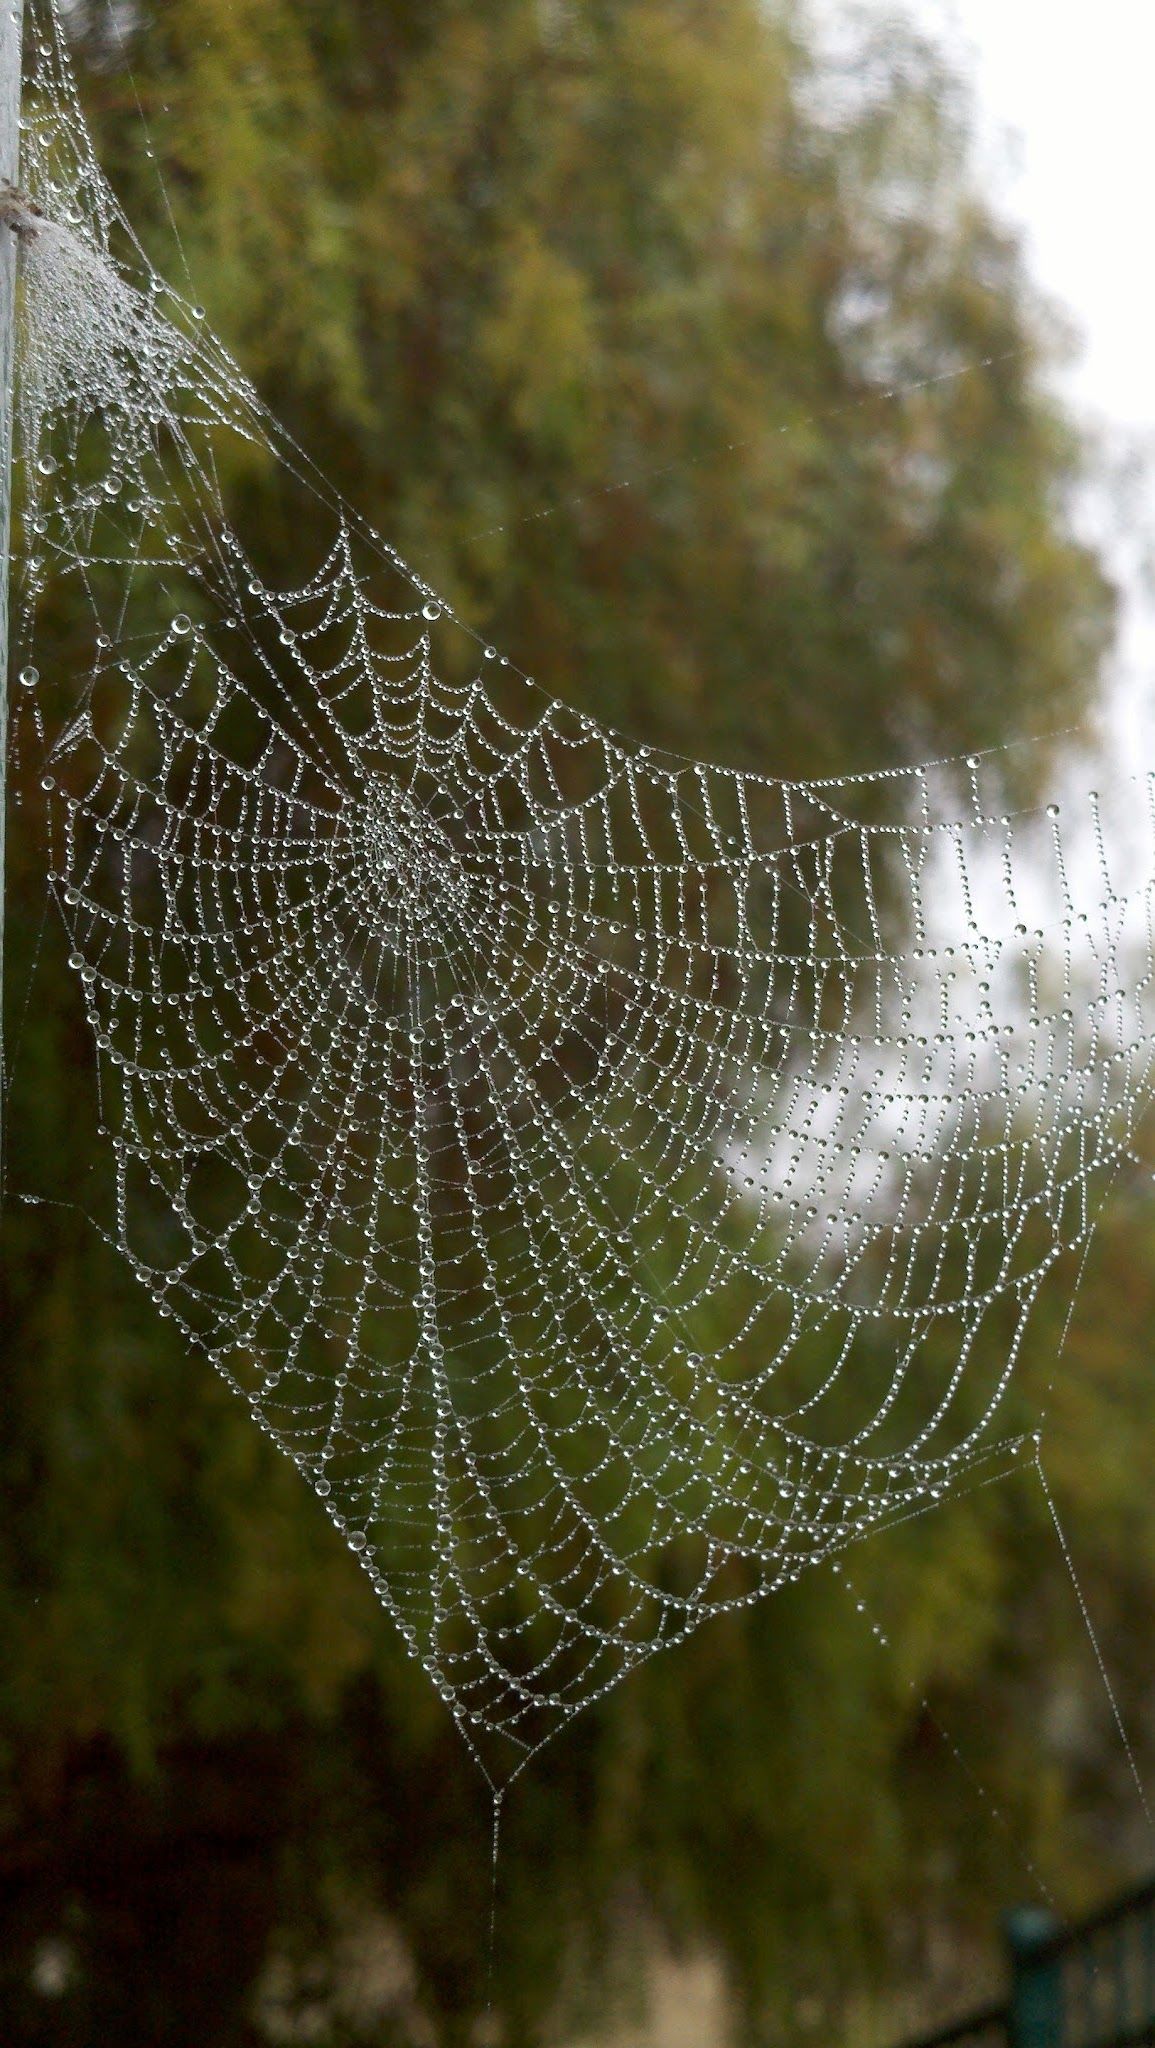 A beaded web | A Garden View | Pinterest | Spider webs, Spider and ...